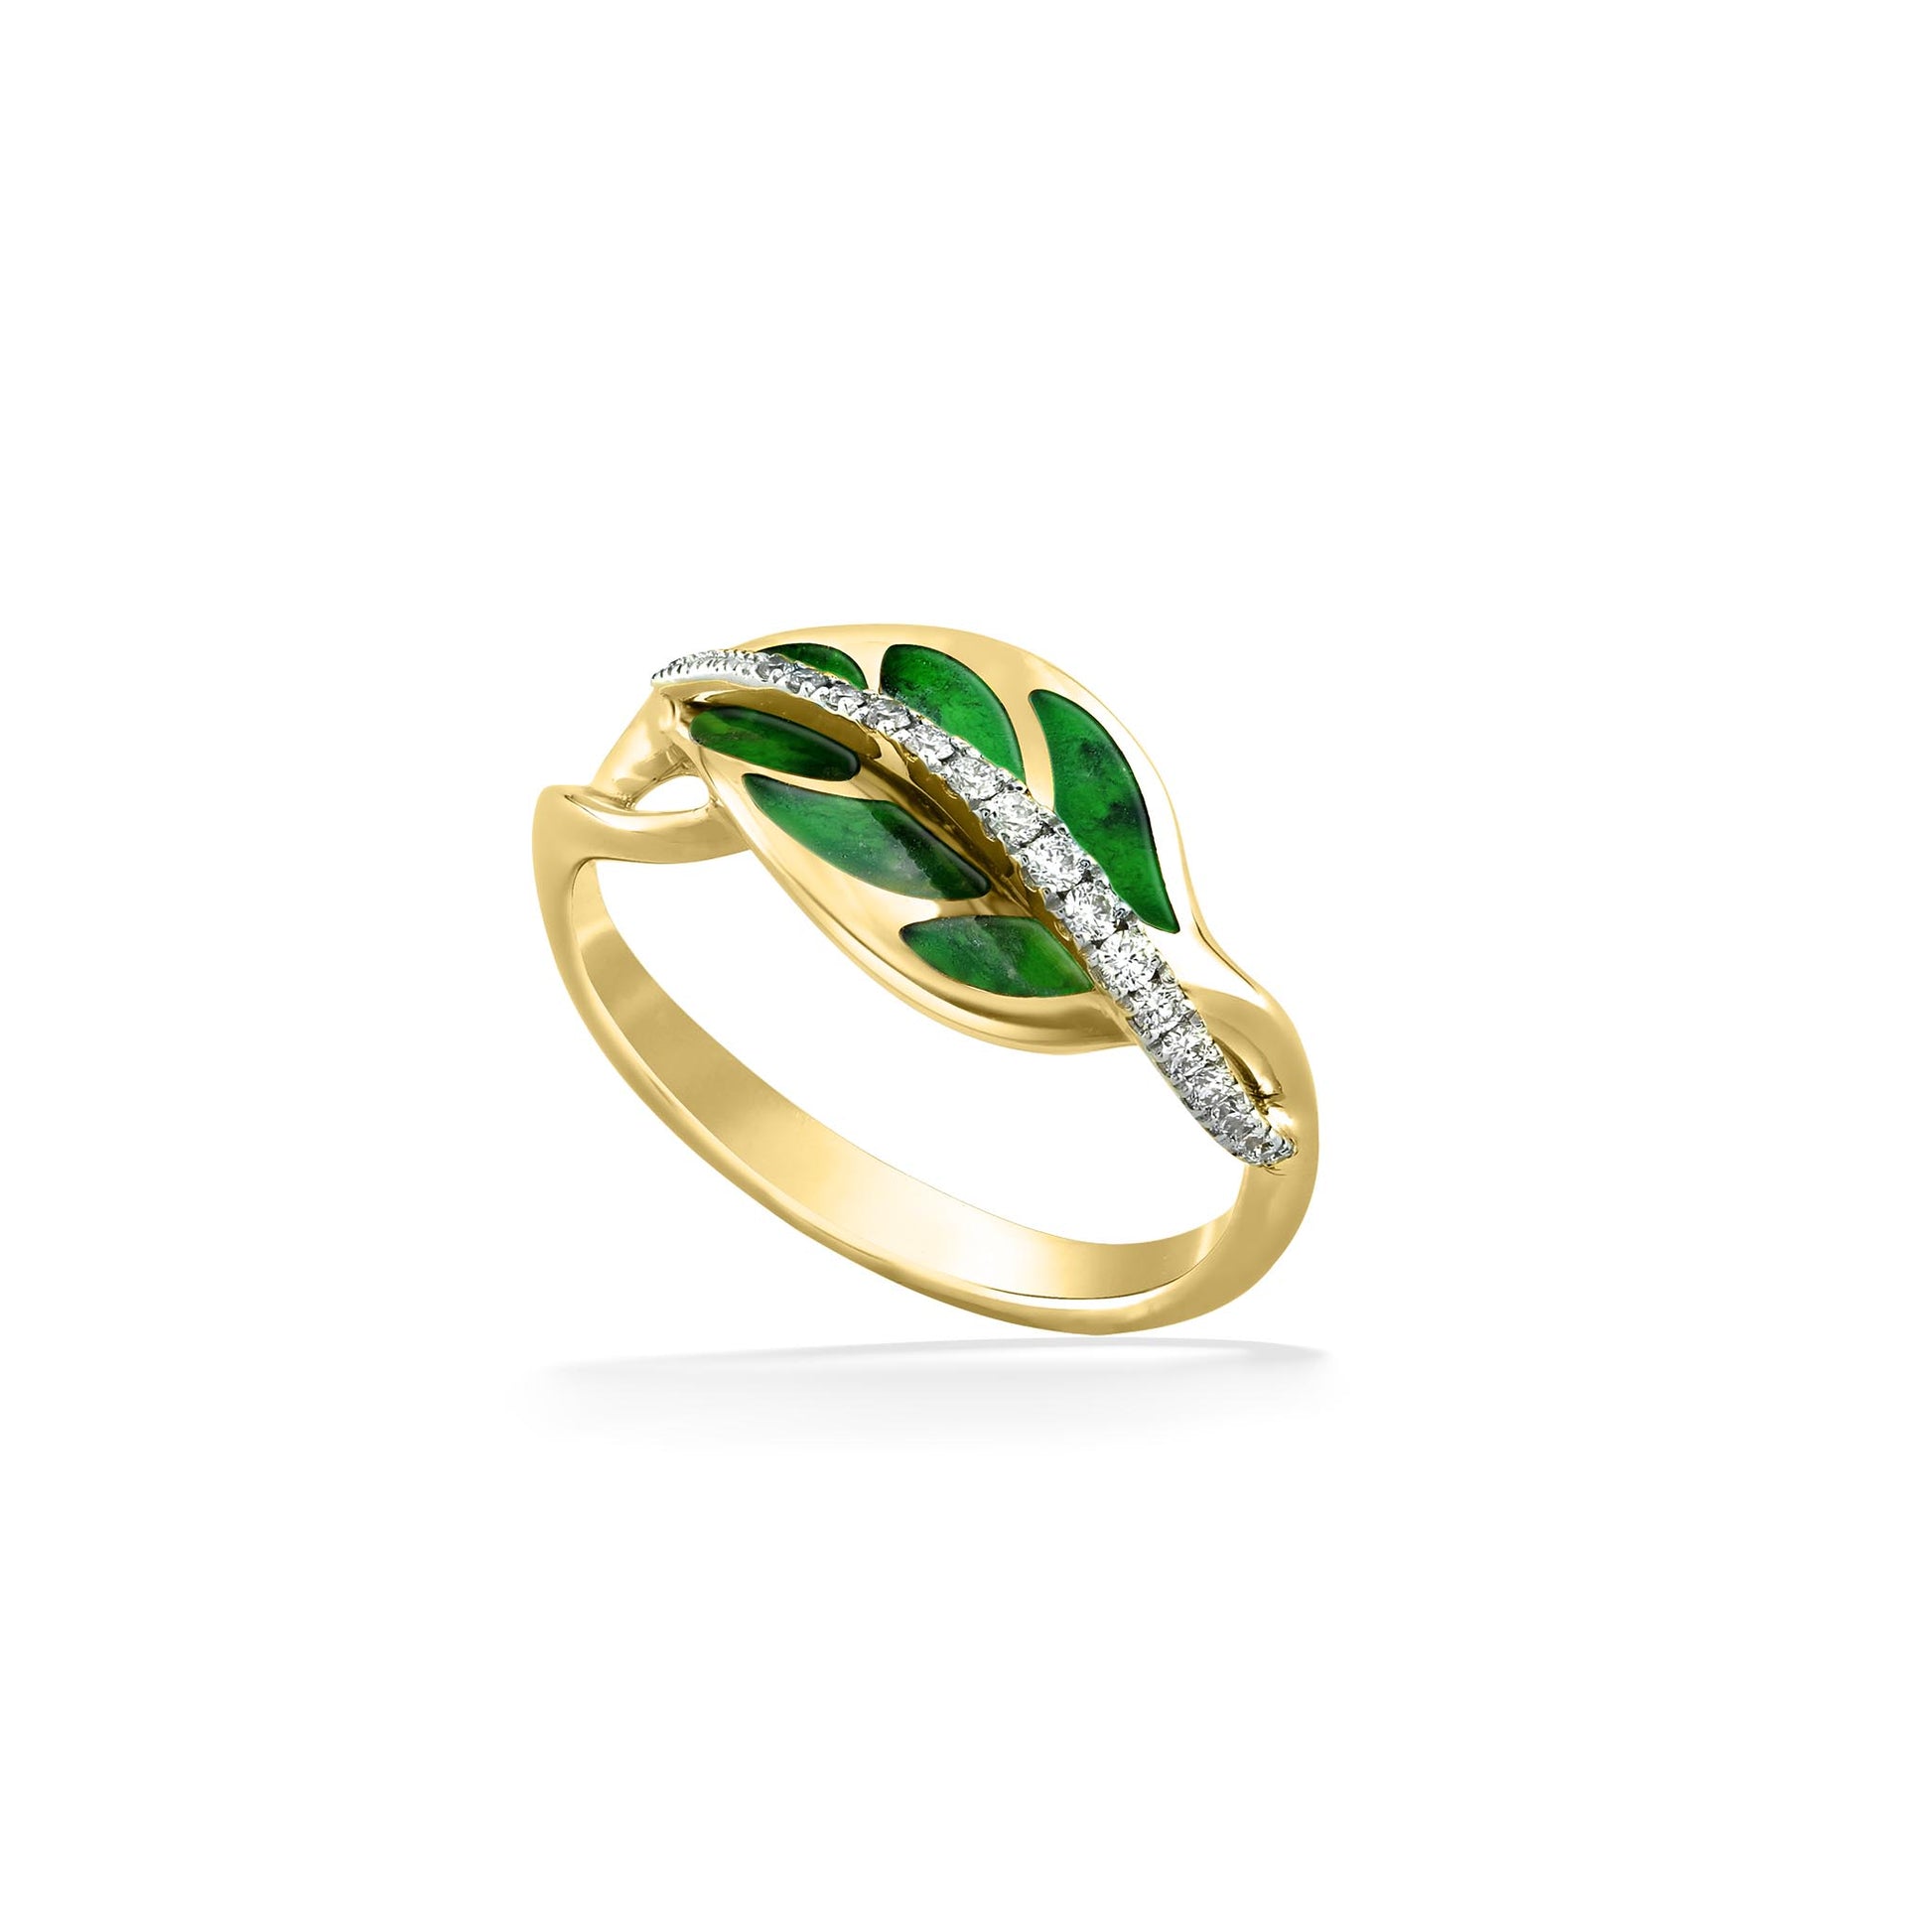 43027 - 14K Yellow Gold - Maile Leaf Ring